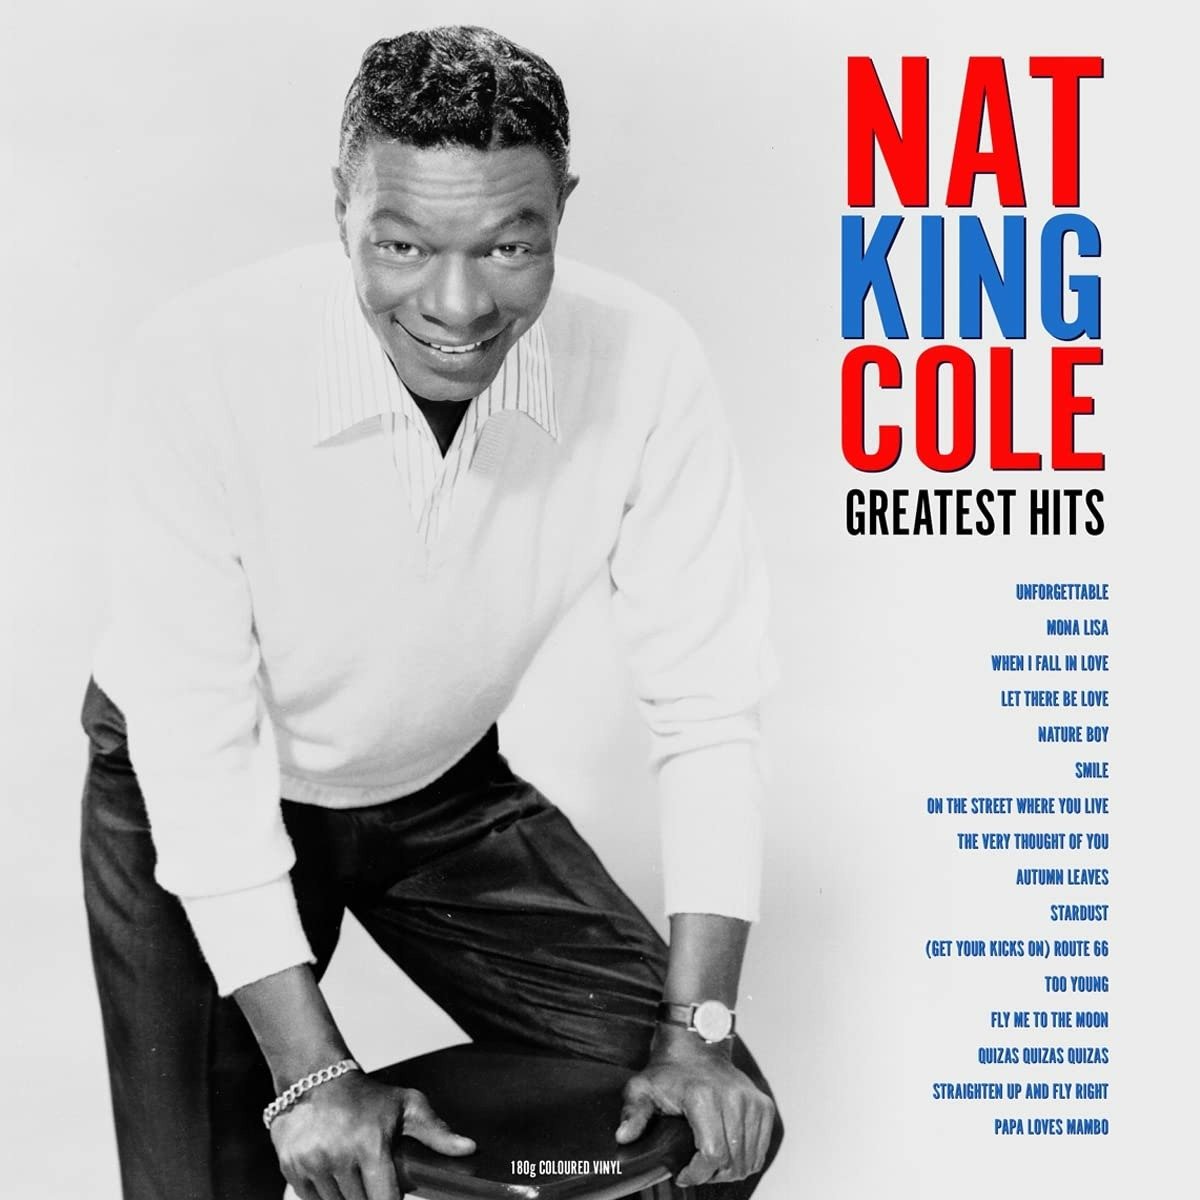 CD Shop - COLE, NAT KING GREATEST HITS